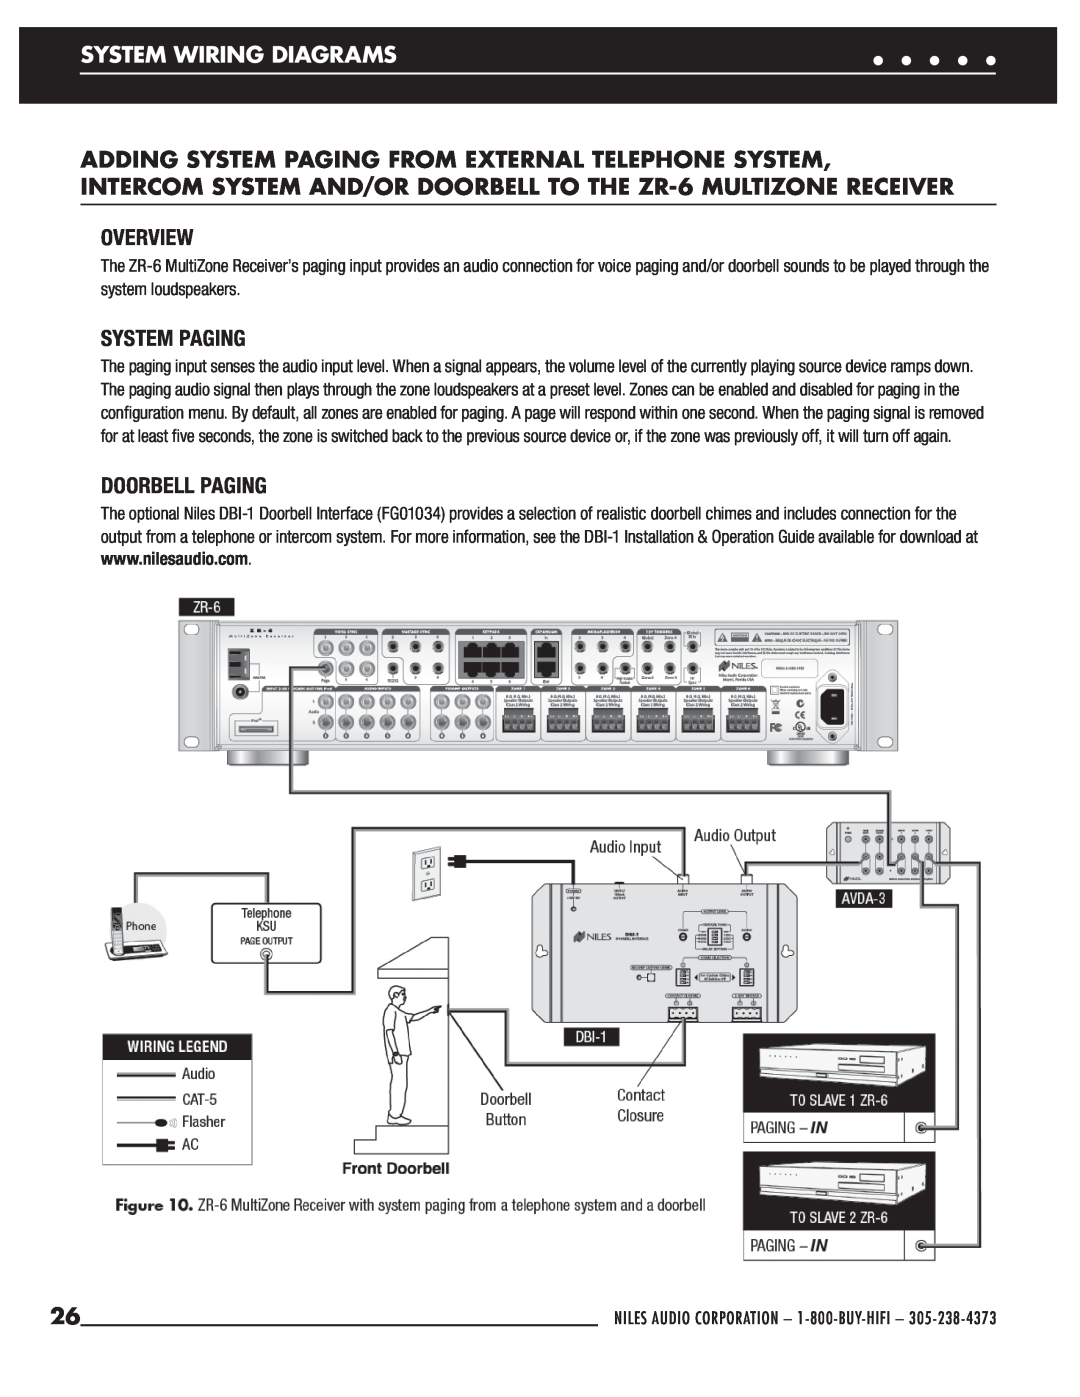 Niles Audio ZR-6 manual System Paging, Doorbell Paging, System Wiring Diagrams, Overview 